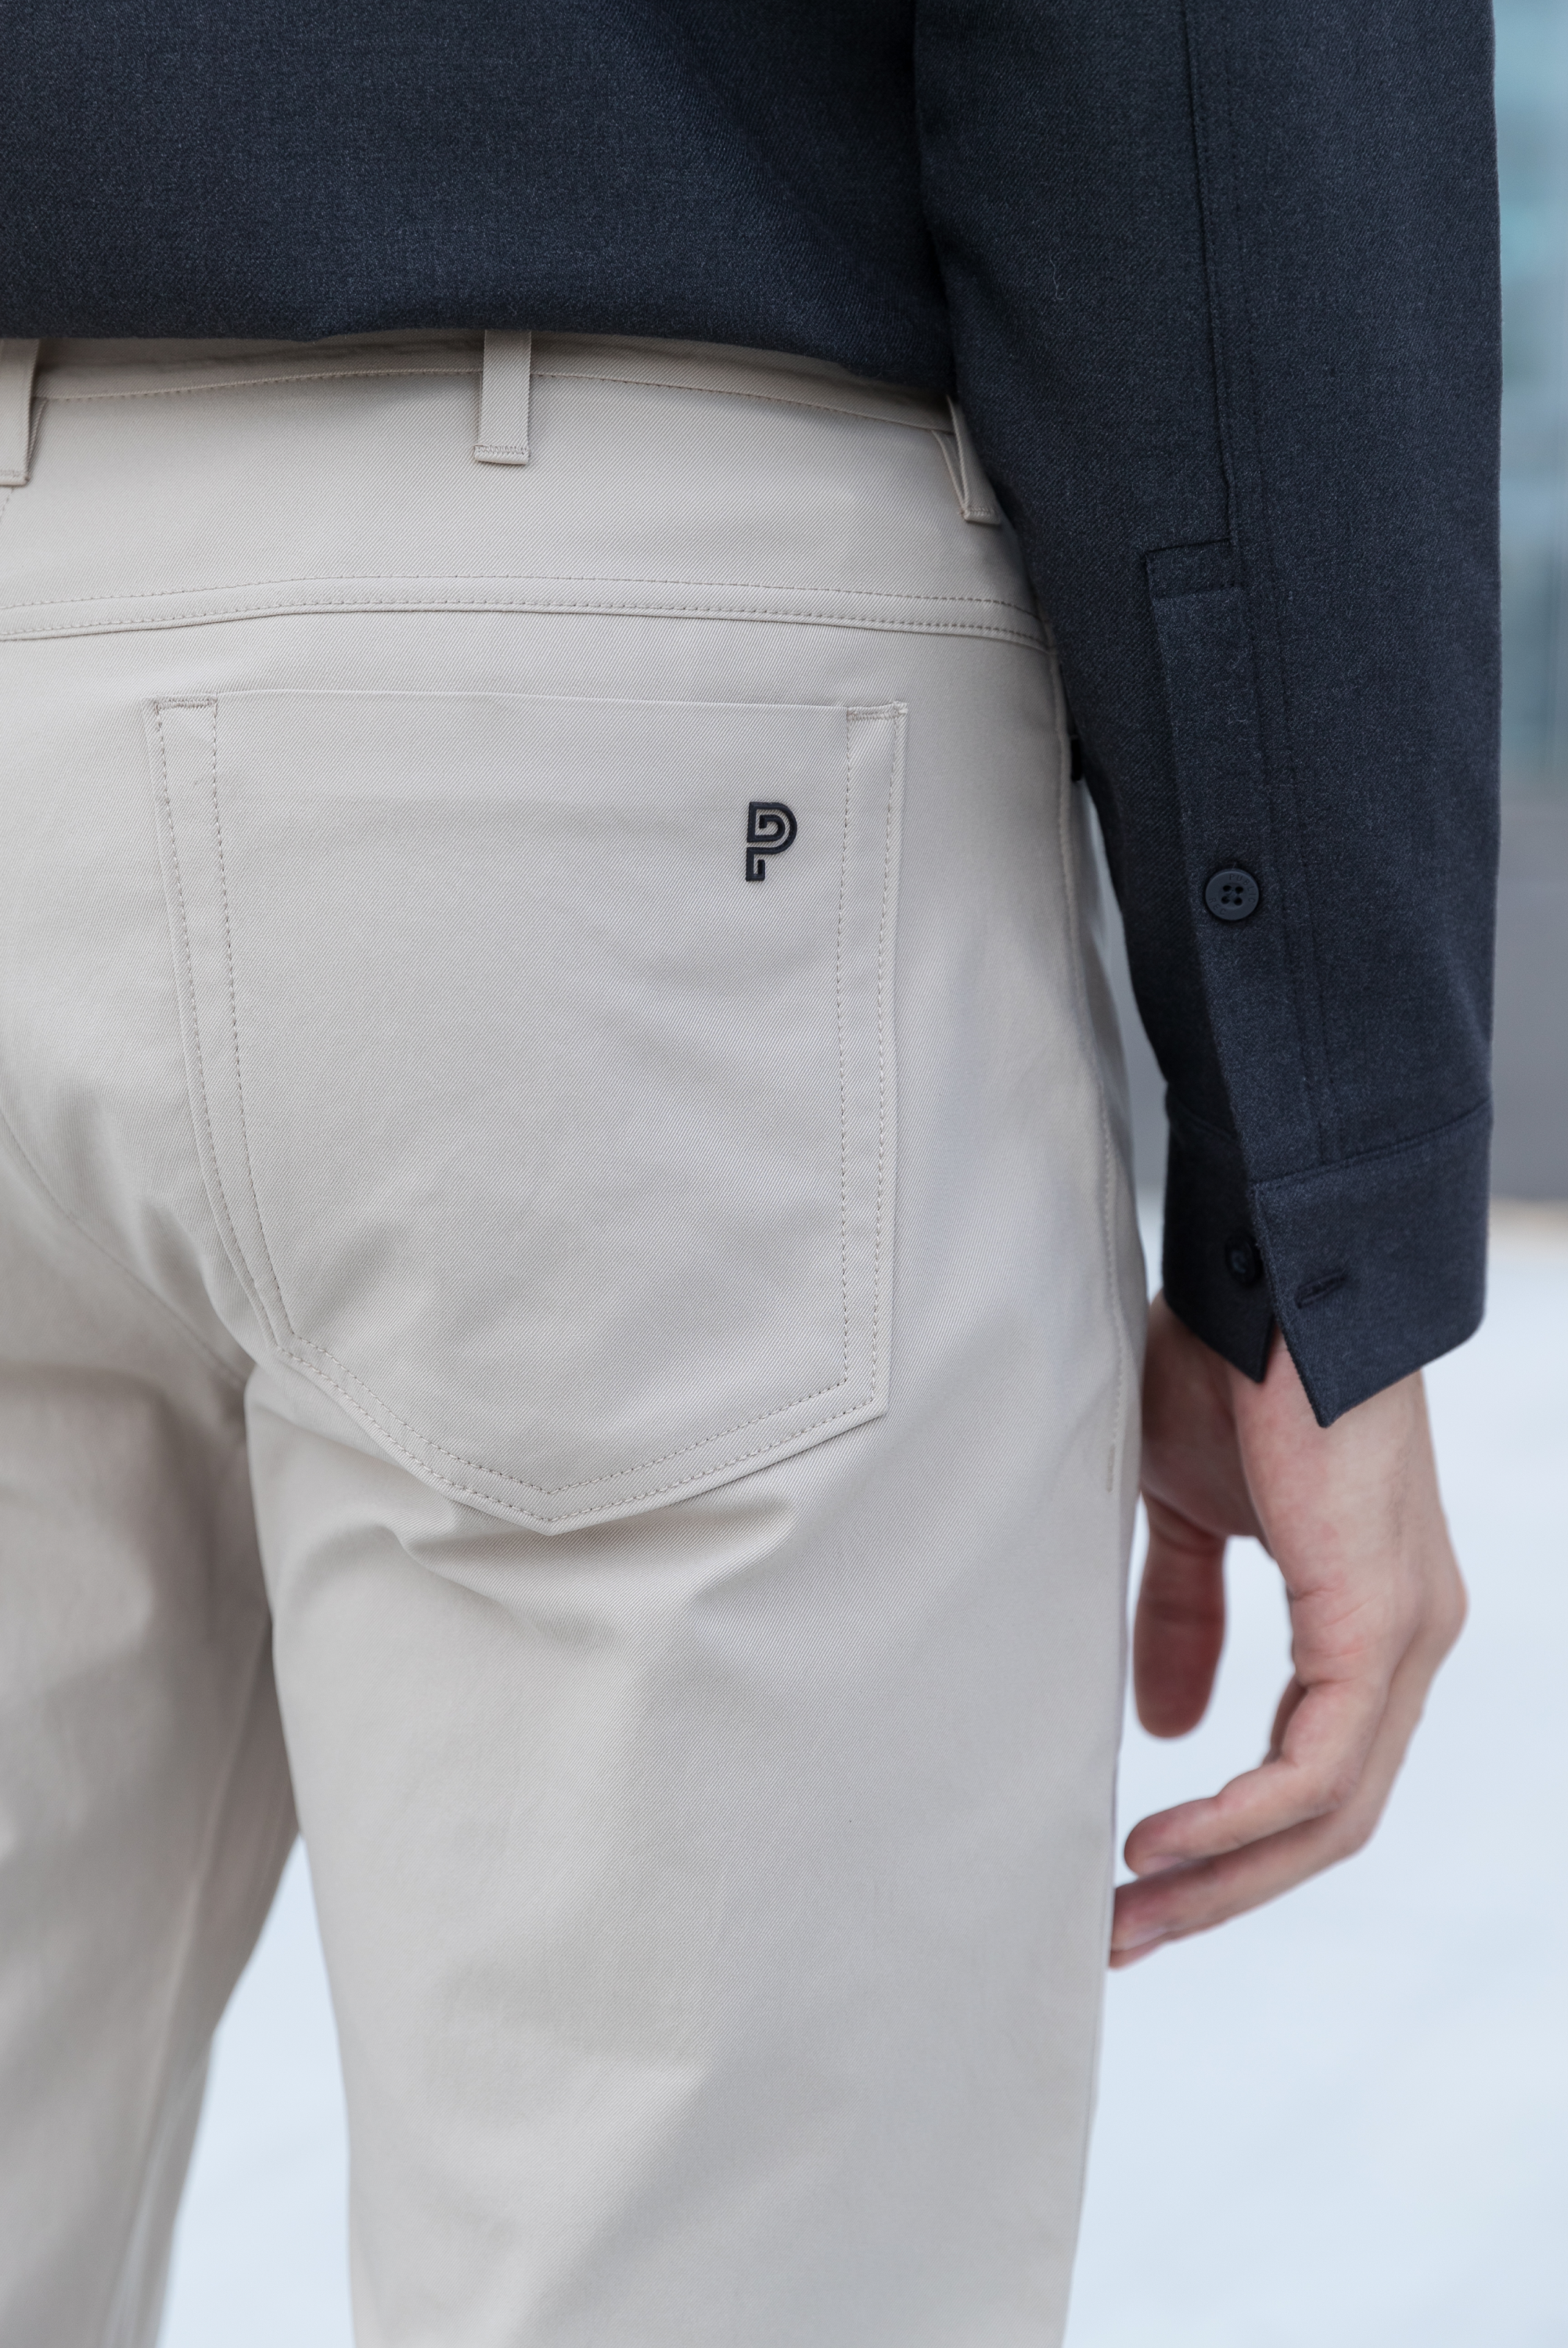 workday pant 2.0